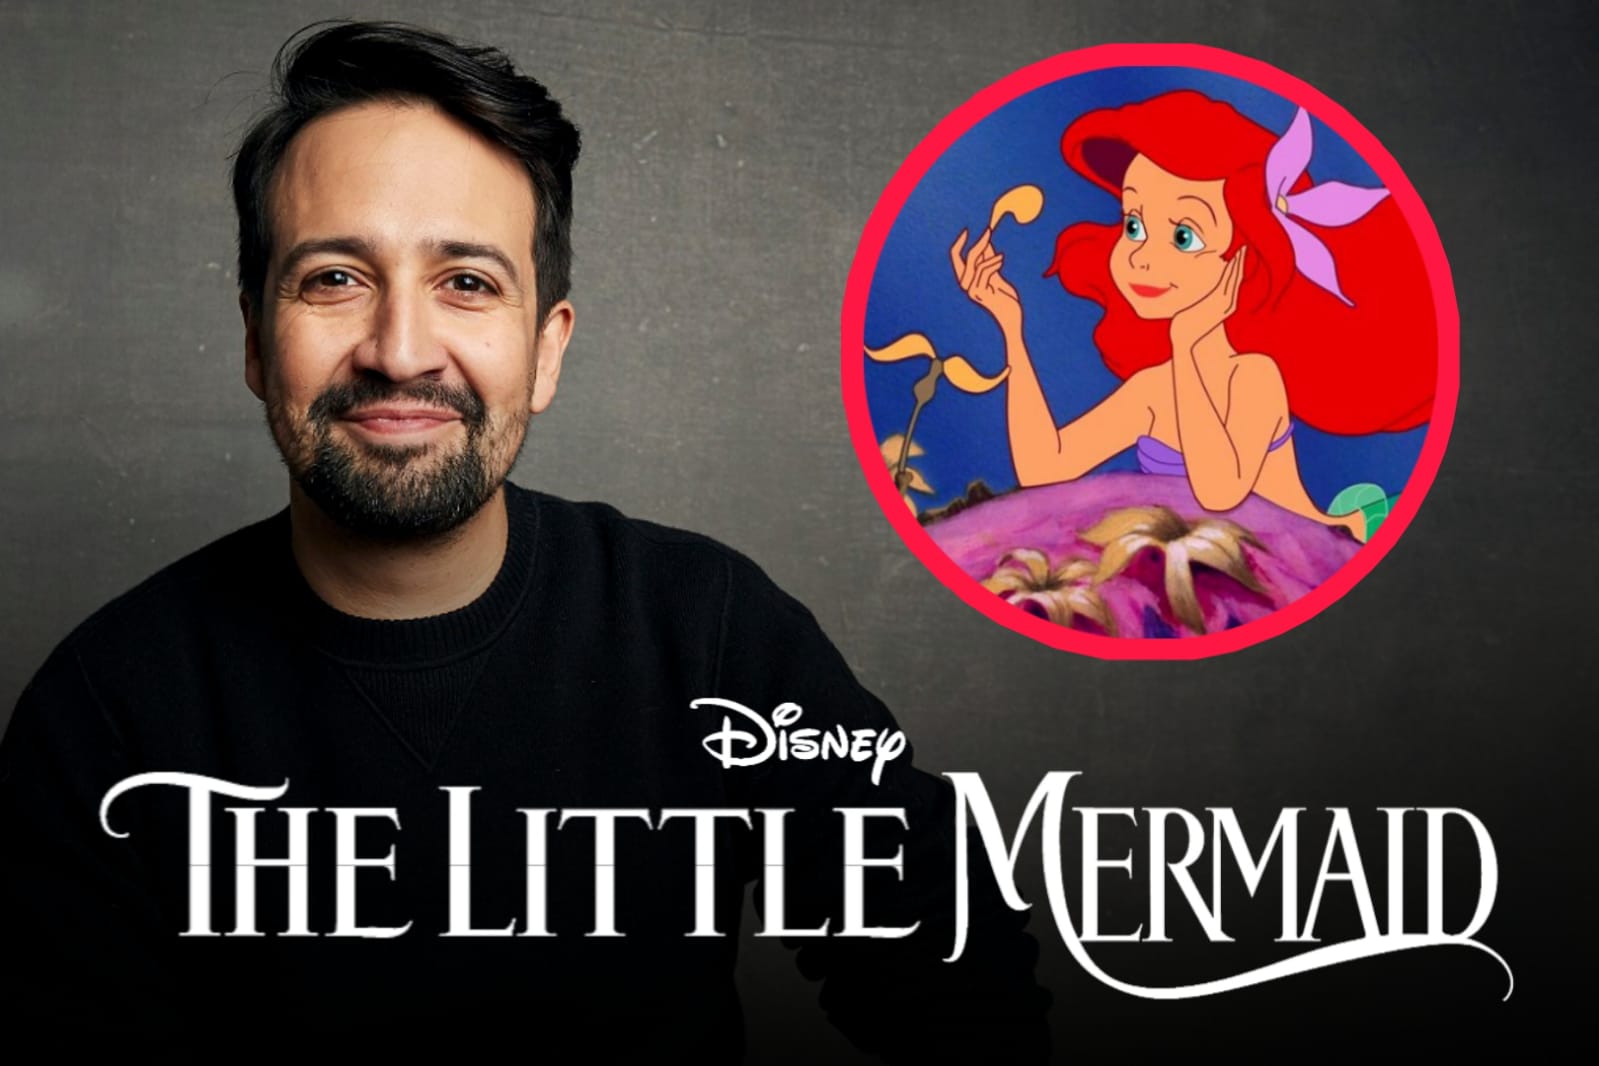 Lin-Manuel Miranda Says “Every song you love in The Animated Little Mermaid is still in The Little Mermaid”